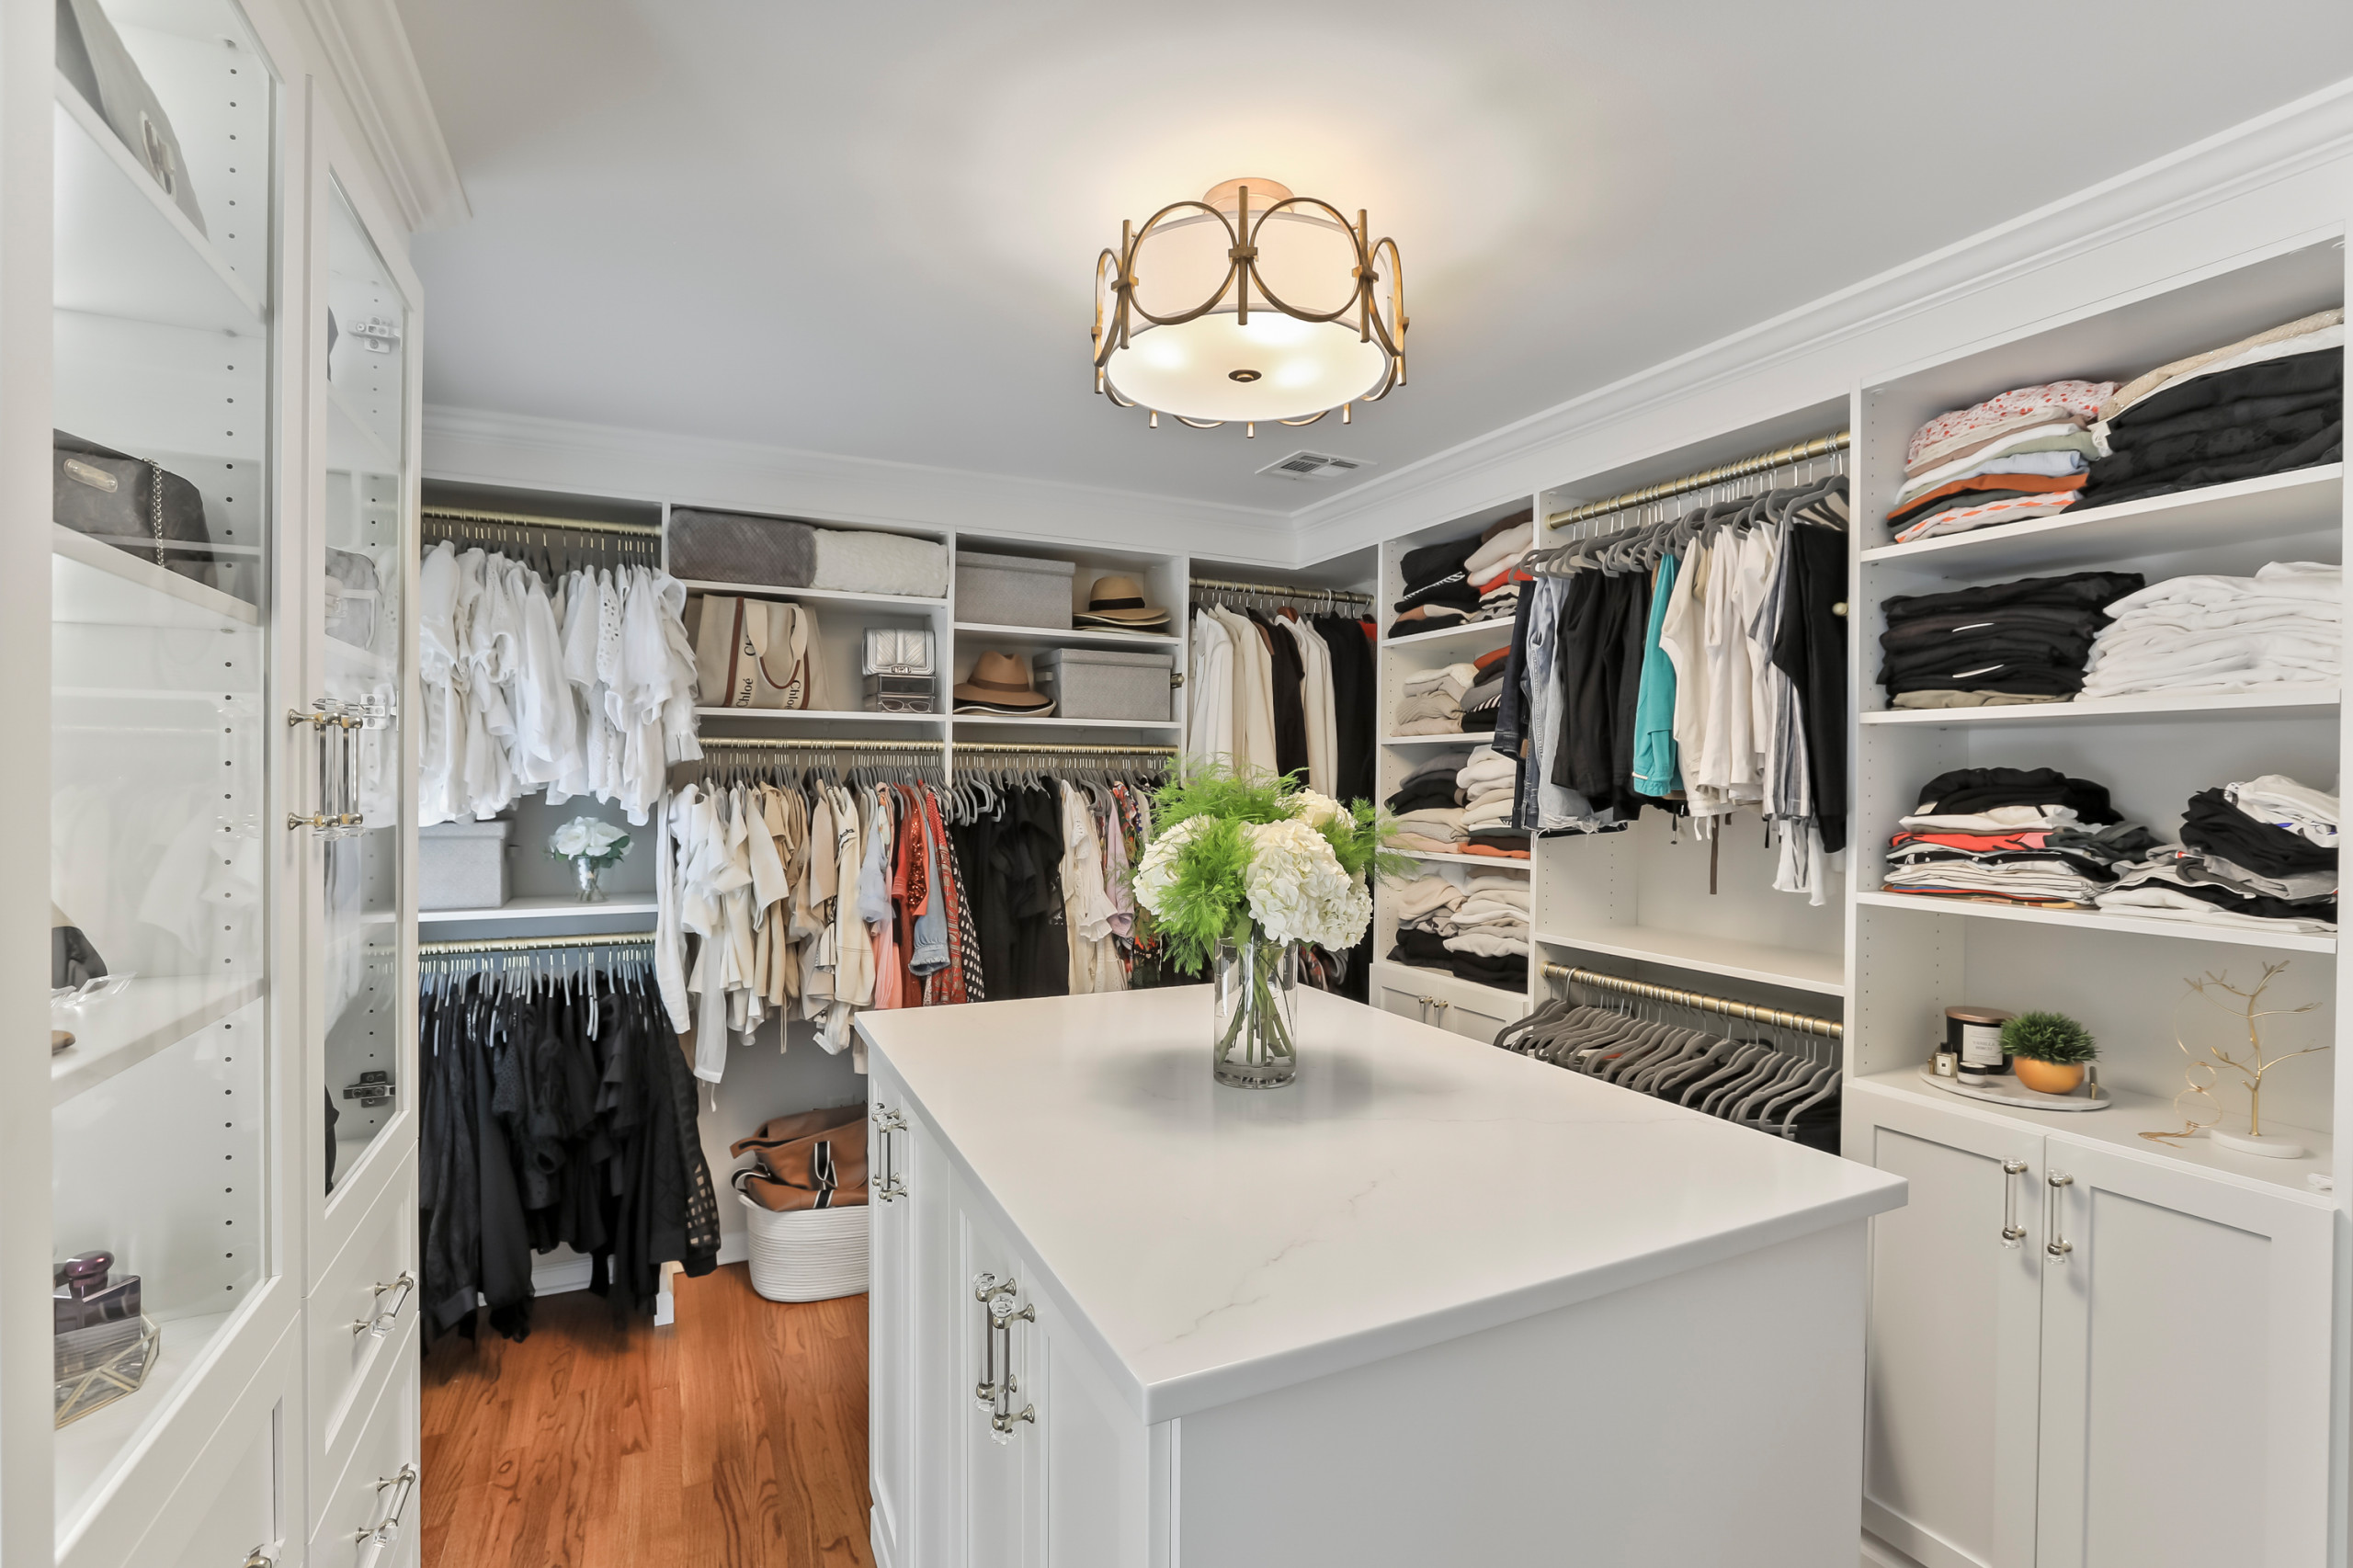 Recent Walk-In Closet Projects